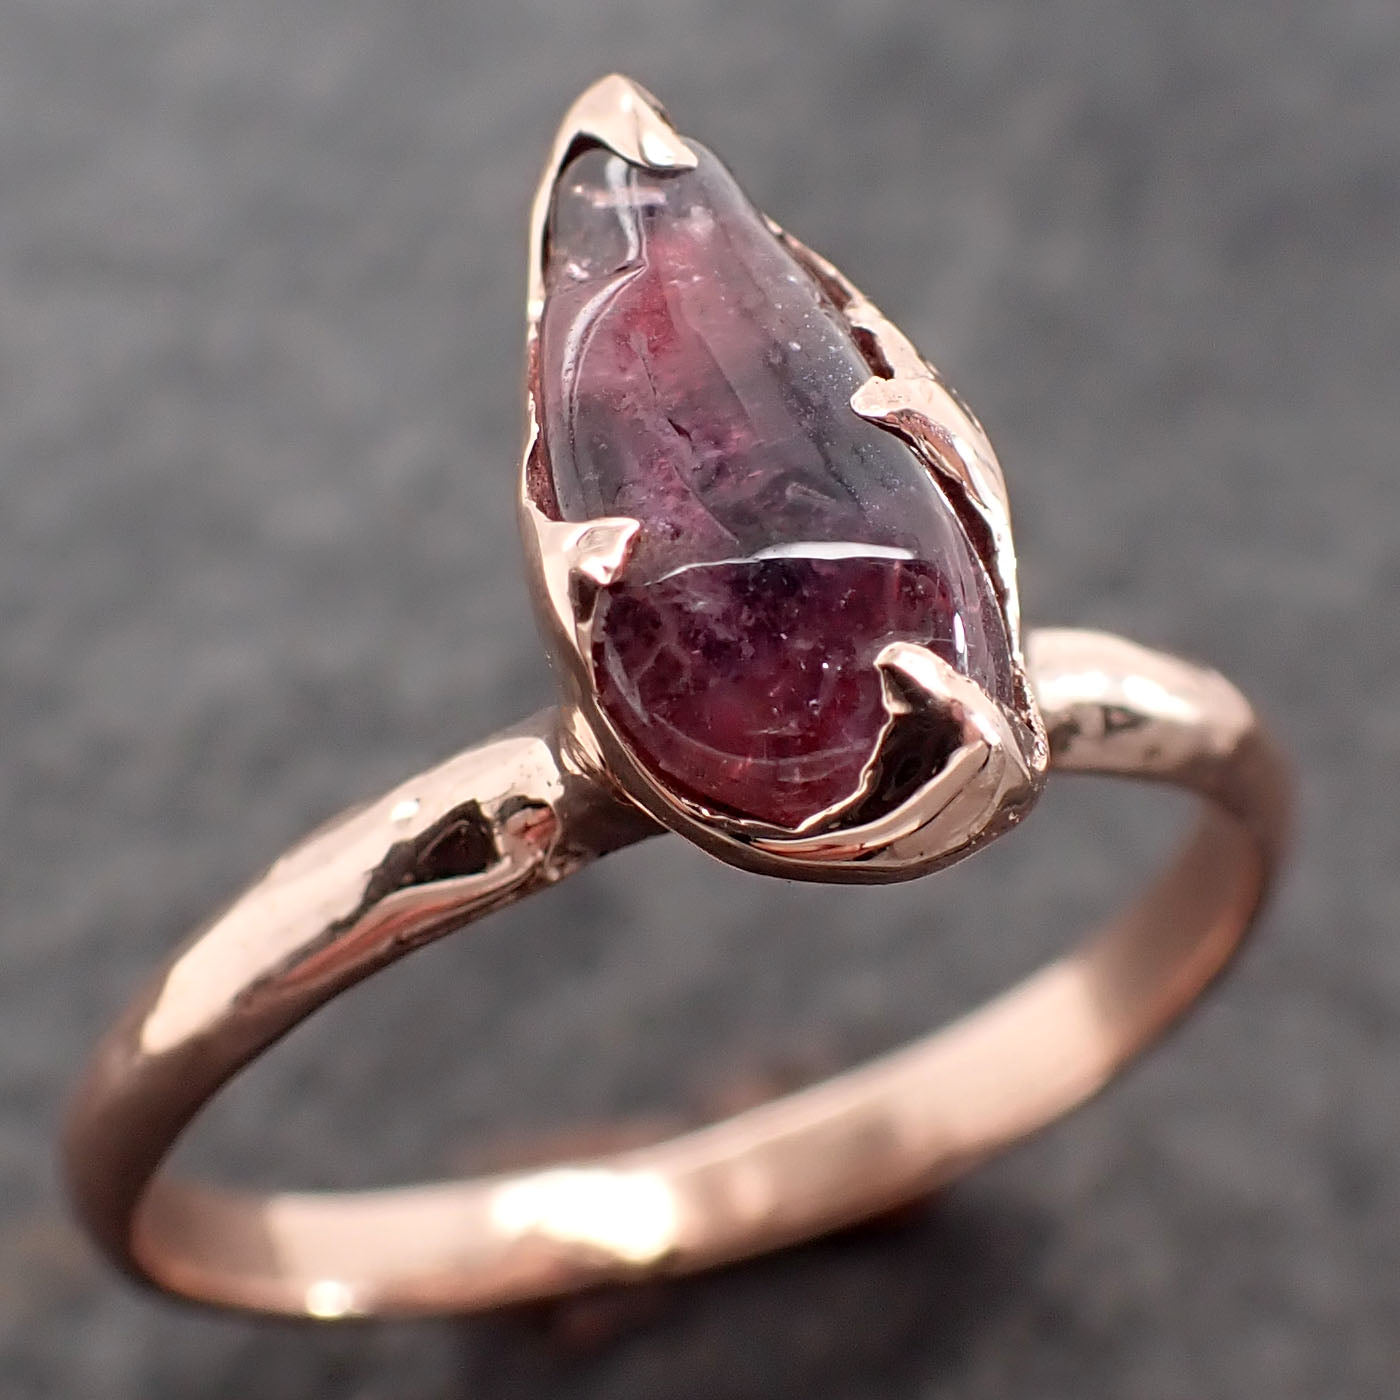 sapphire pebble ruby red candy polished 14k rose gold solitaire gemstone ring 2712 Alternative Engagement